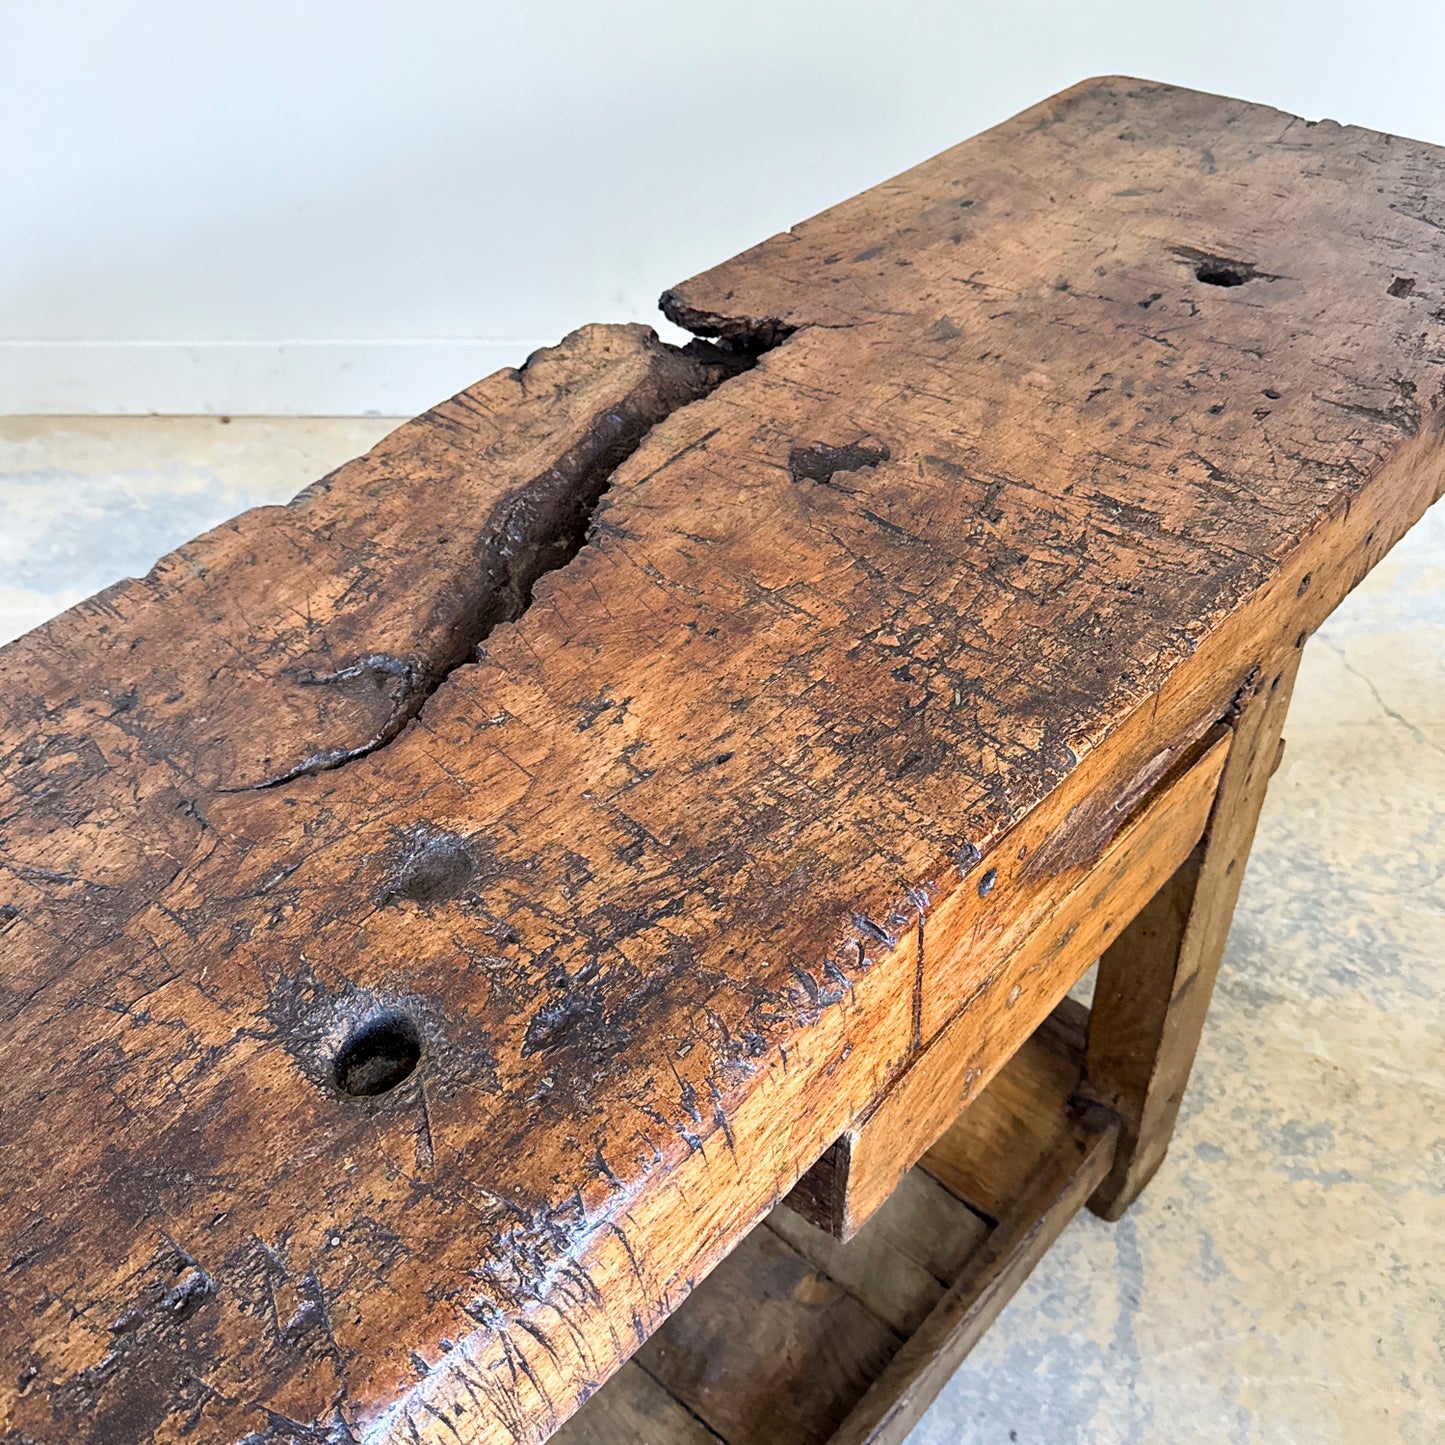 Antique Rustic Work Bench with One Drawer and Original Hardware